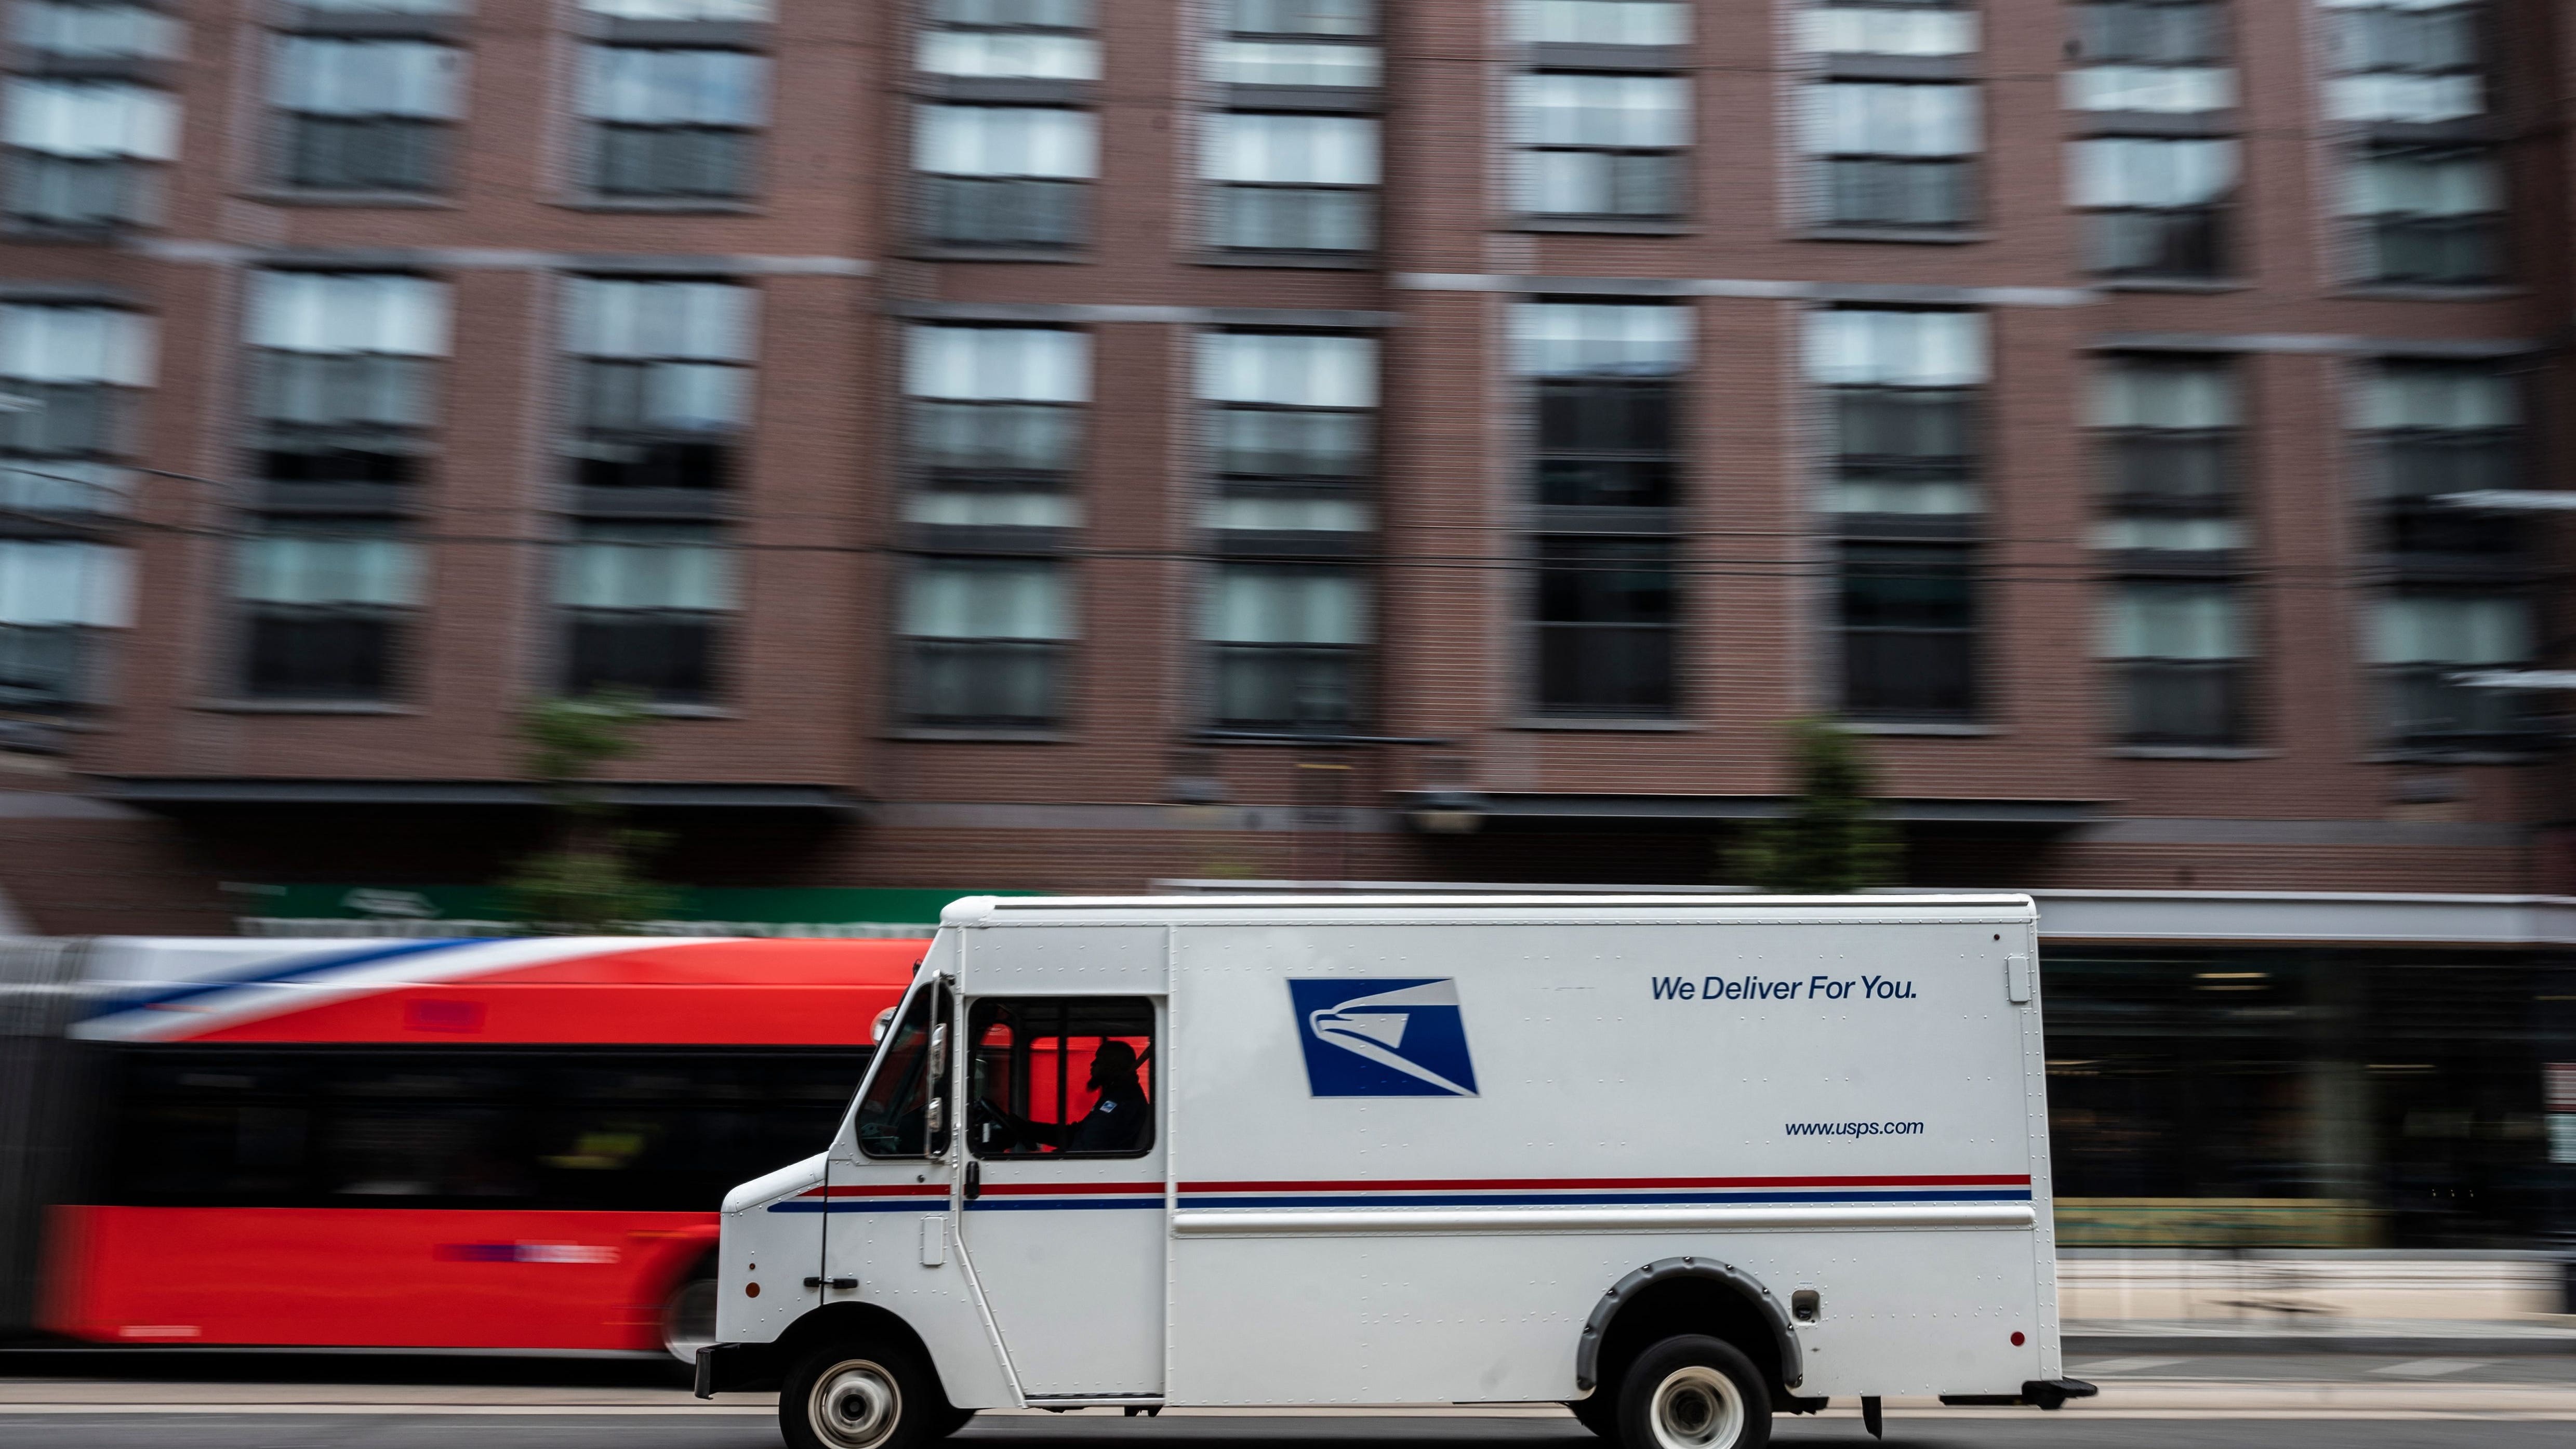 A postman drives a United States Postal service (USPS) mail delivery truck through Washington, DC on August 13, 2021. (Photo by ANDREW CABALLERO-REYNOLDS / AFP) (Photo by ANDREW CABALLERO-REYNOLDS/AFP via Getty Images) ORG XMIT: 0 ORIG FILE ID: AFP_9L433M.jpg